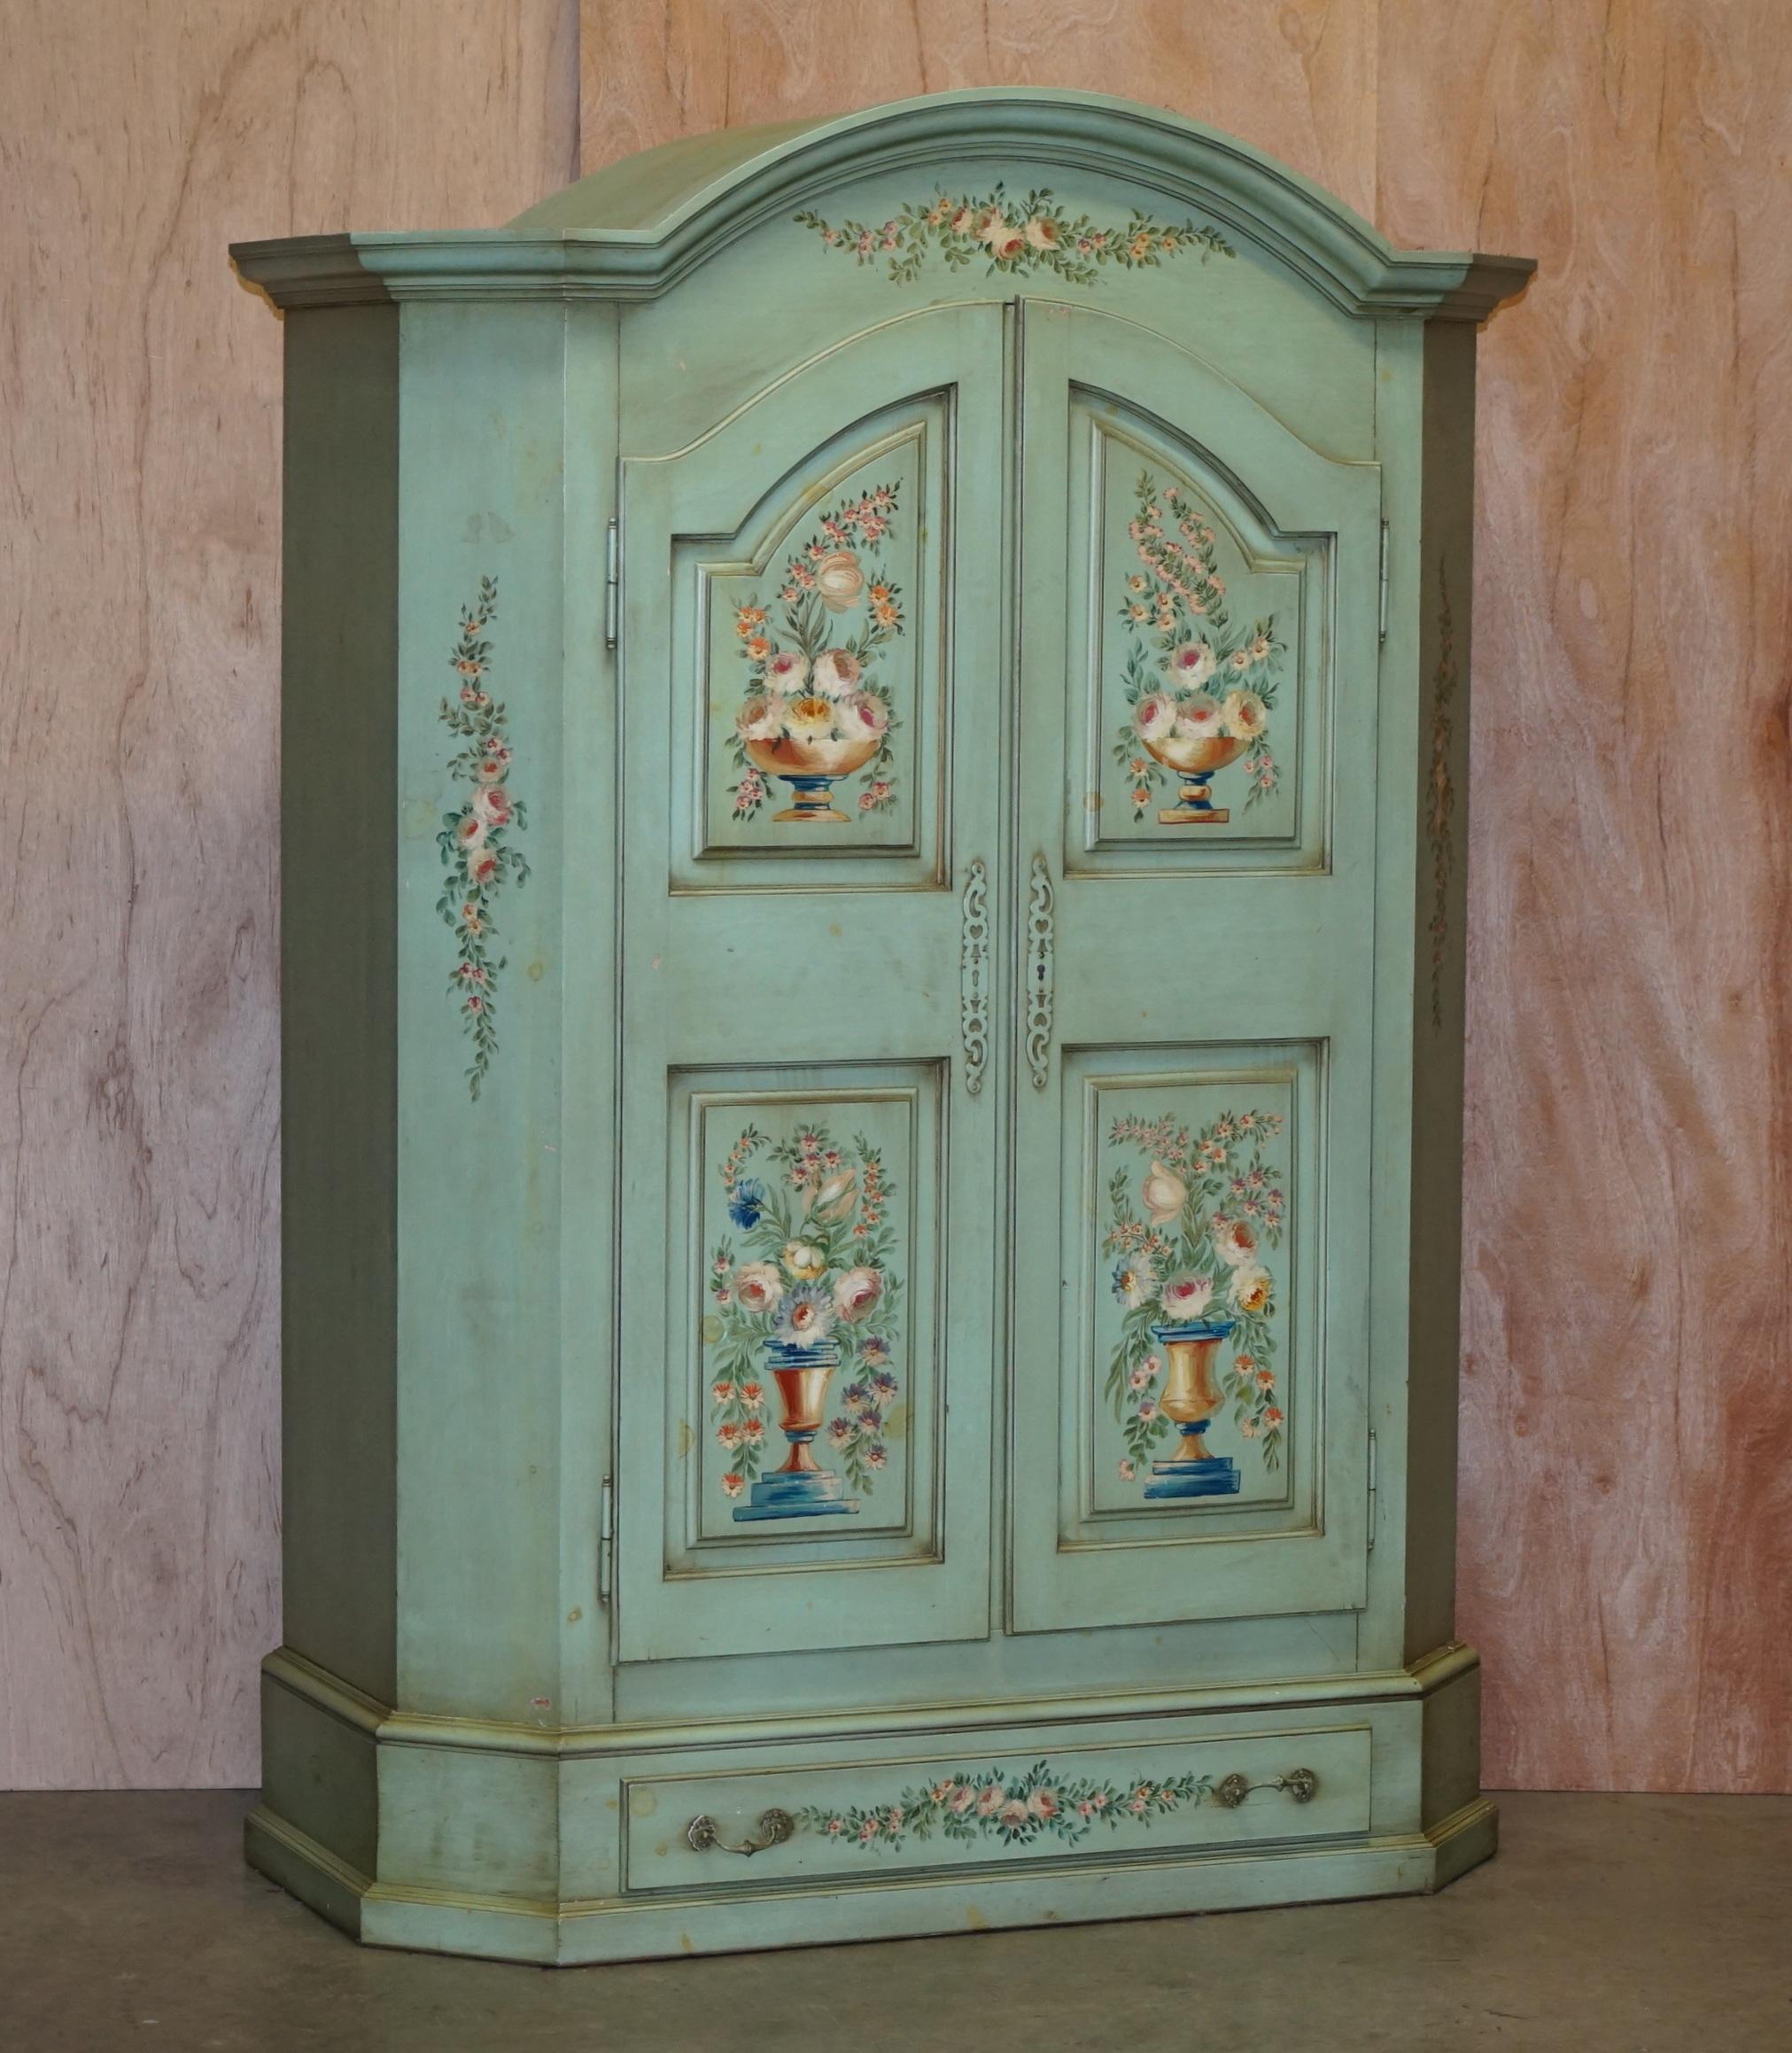 We are delighted to offer this lovely 18th century style hand painted duck egg blue wardrobe with floral detailing.

A very good looking well made and decorative wardrobe. It’s based on a Swedish 18th century design that was originally used on